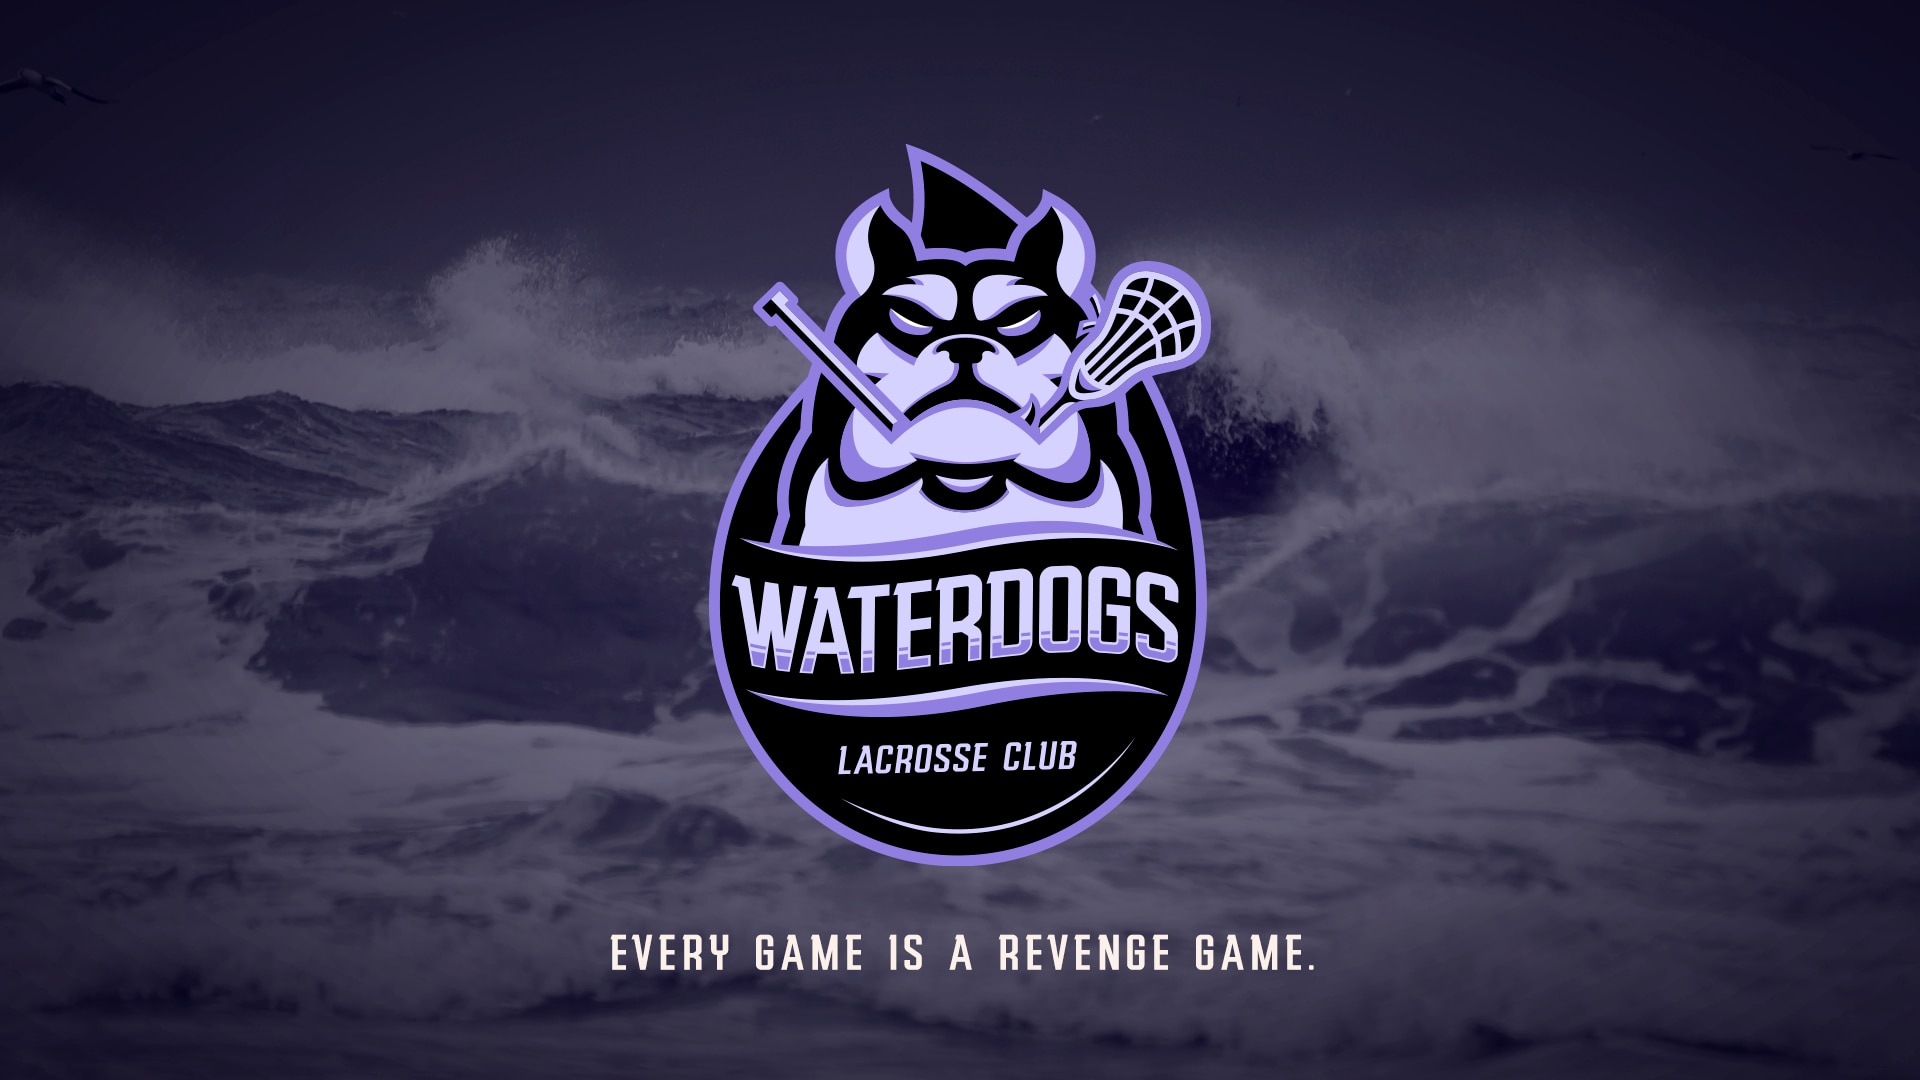 PLL announces Waterdogs LC as the name of the new expansion lacrosse